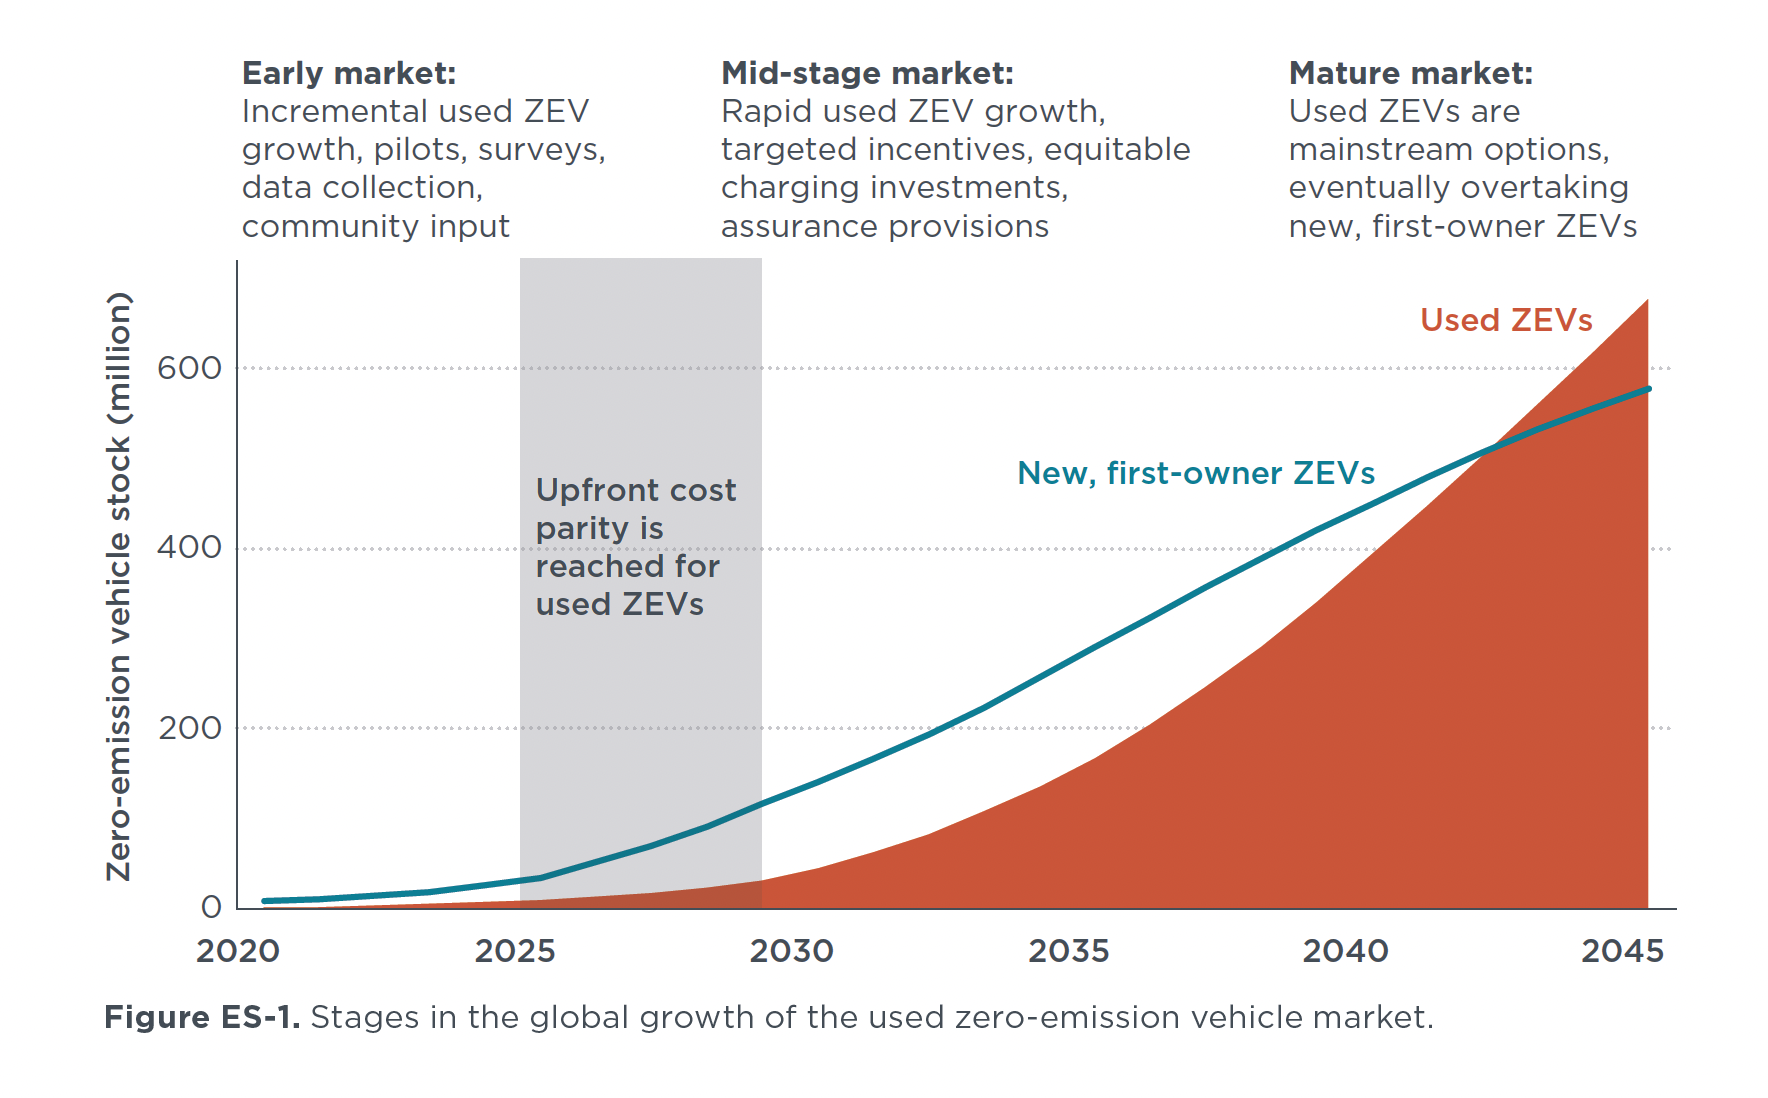 Understanding and supporting the used zeroemission vehicle market